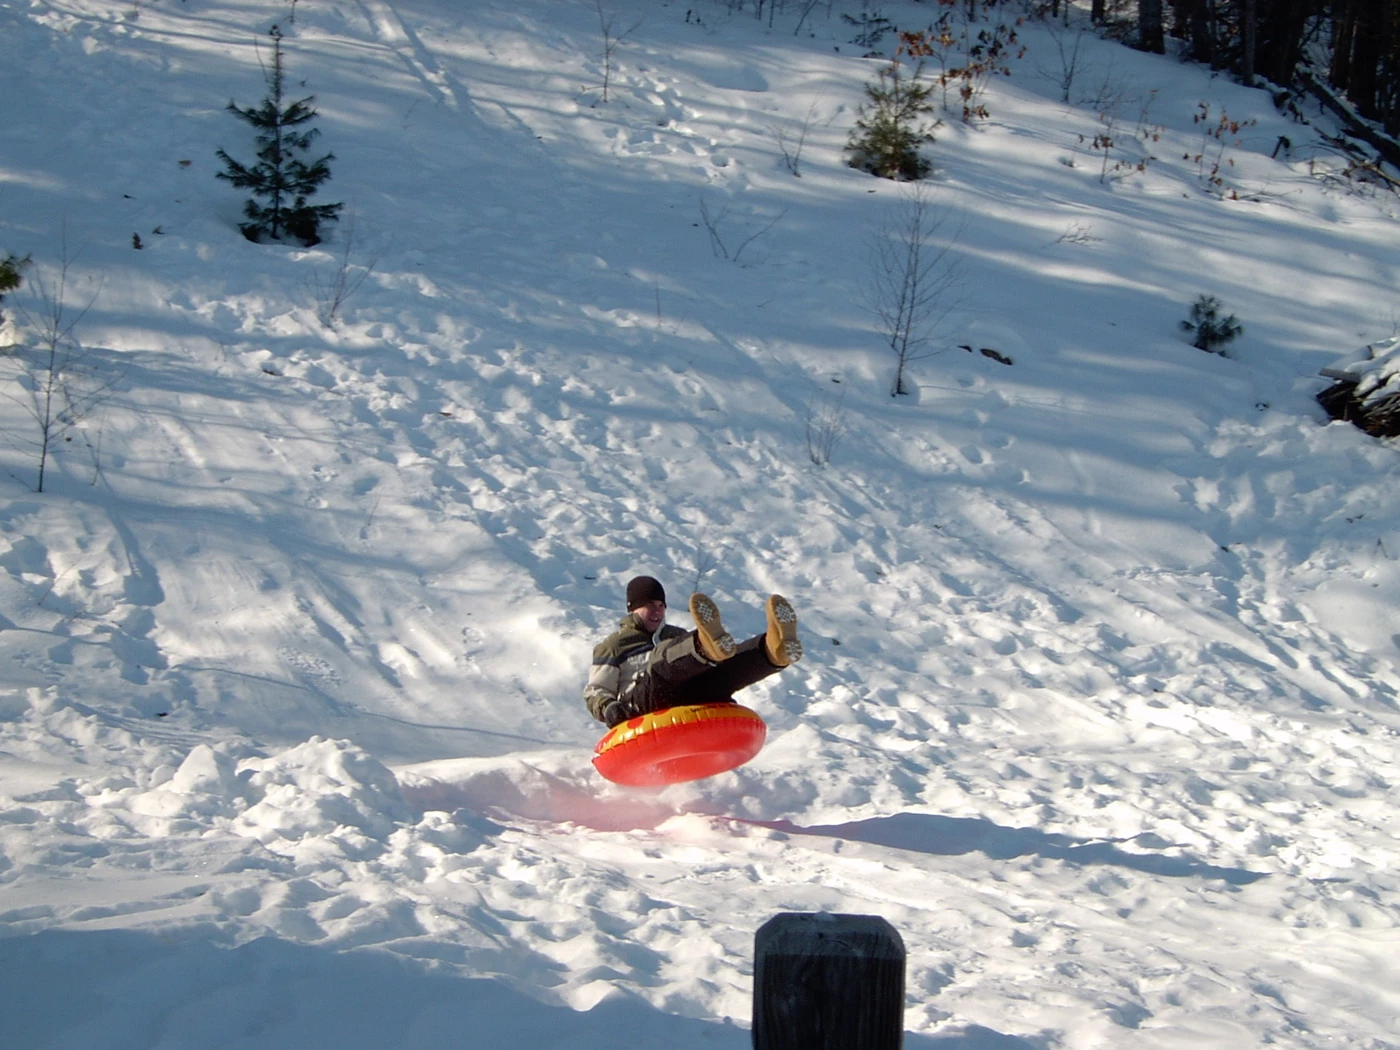 A man in the air coming off a snow ramp on an inflatable tube at the bottom of a slope